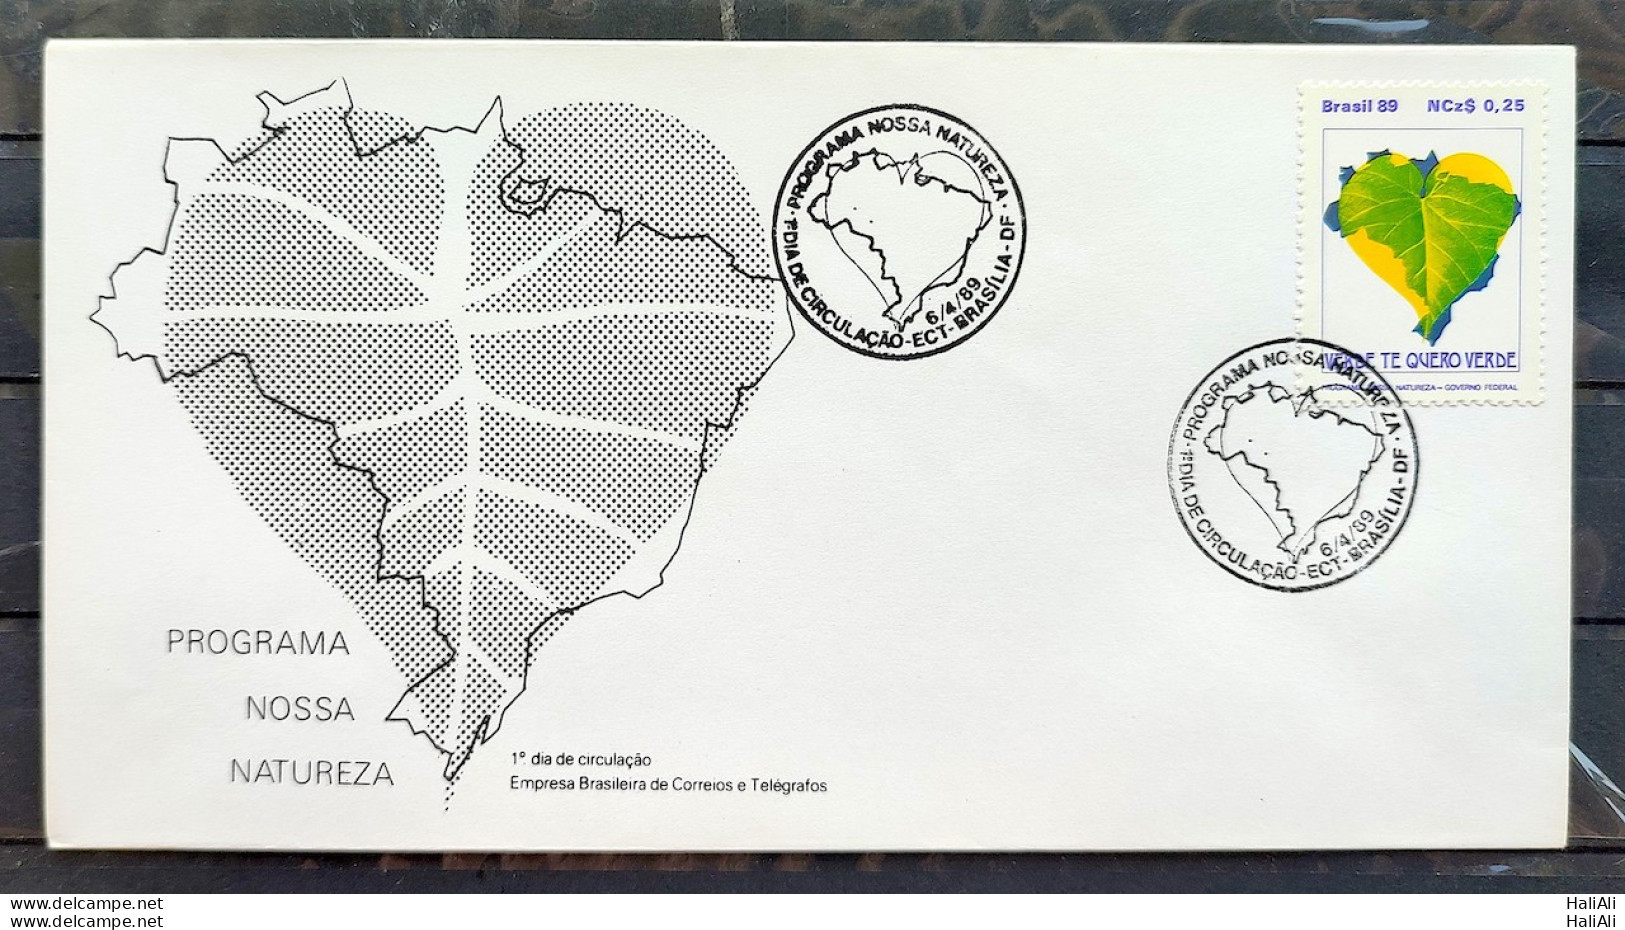 Brazil Envelope FDC 466 1989 Our Nature Map Program Environment CBC BSB 04 - Usados